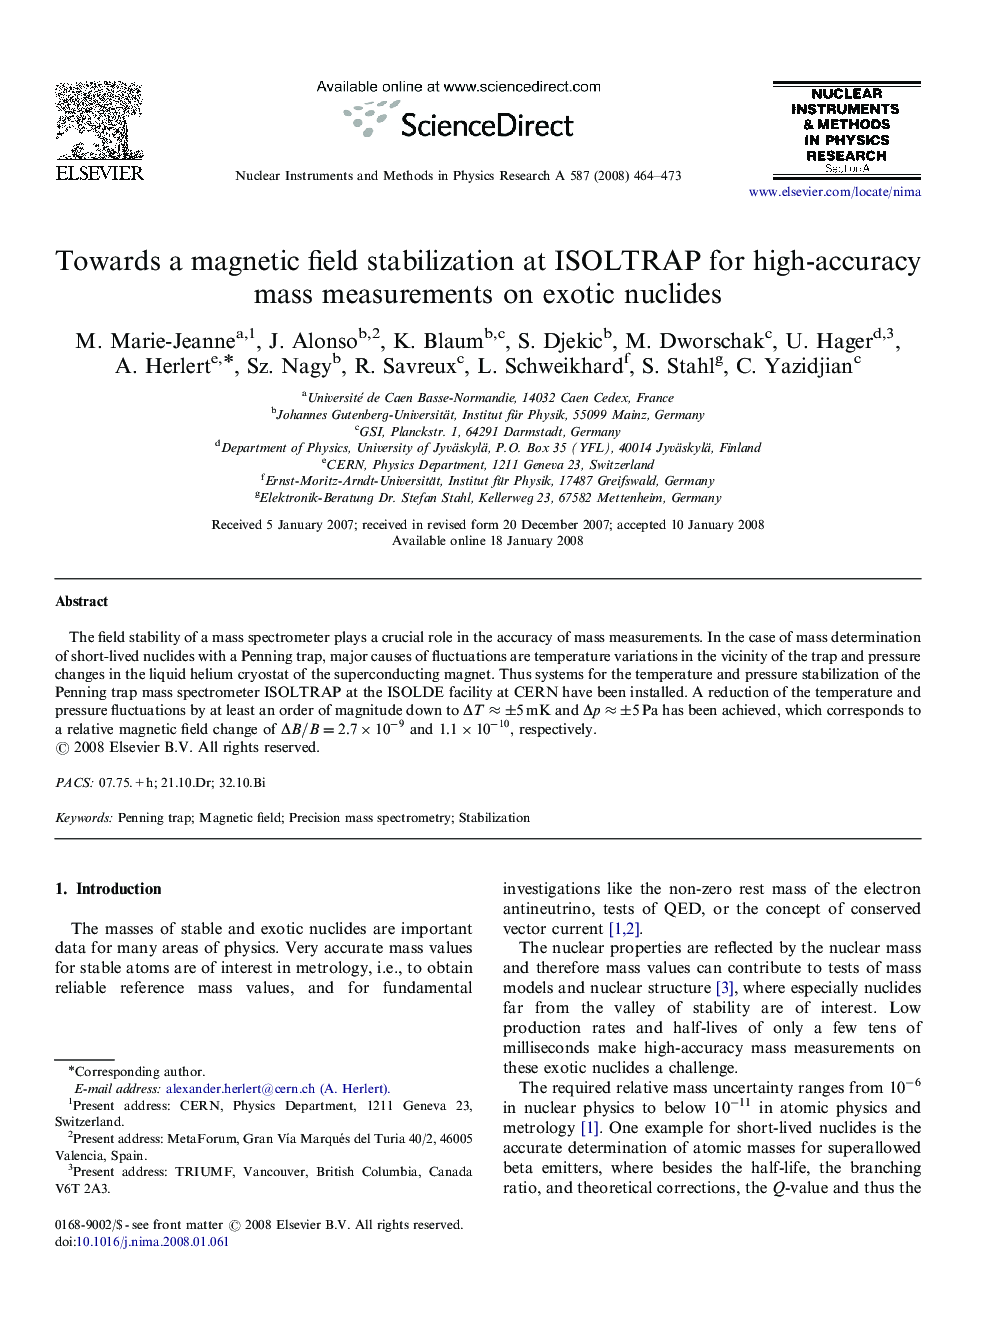 Towards a magnetic field stabilization at ISOLTRAP for high-accuracy mass measurements on exotic nuclides